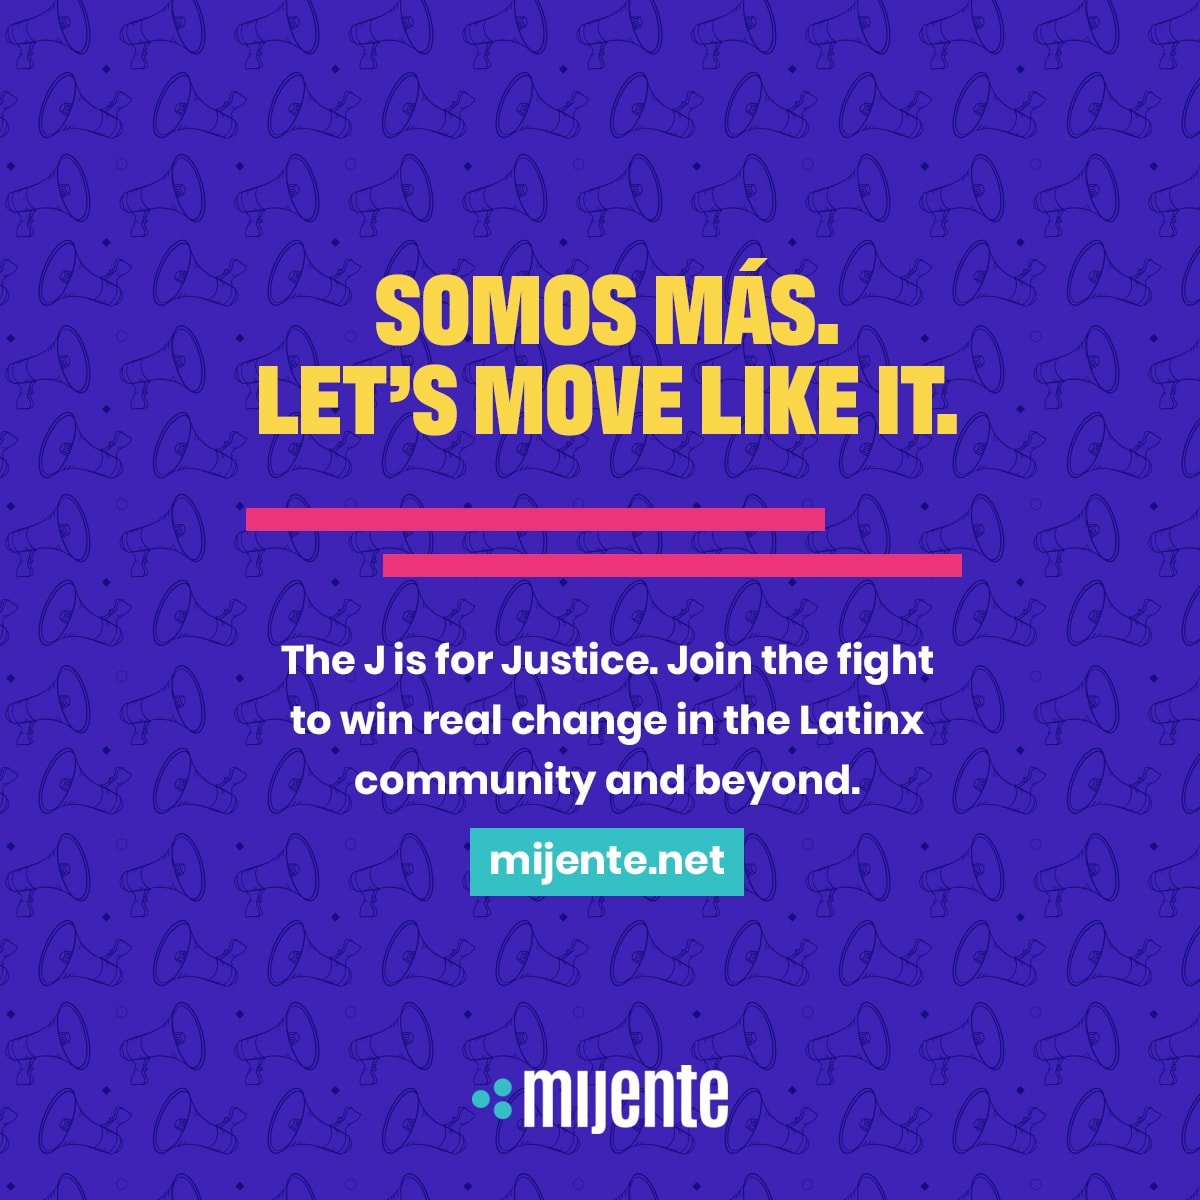 Plain text ad with gold text on purple background for Mijente.